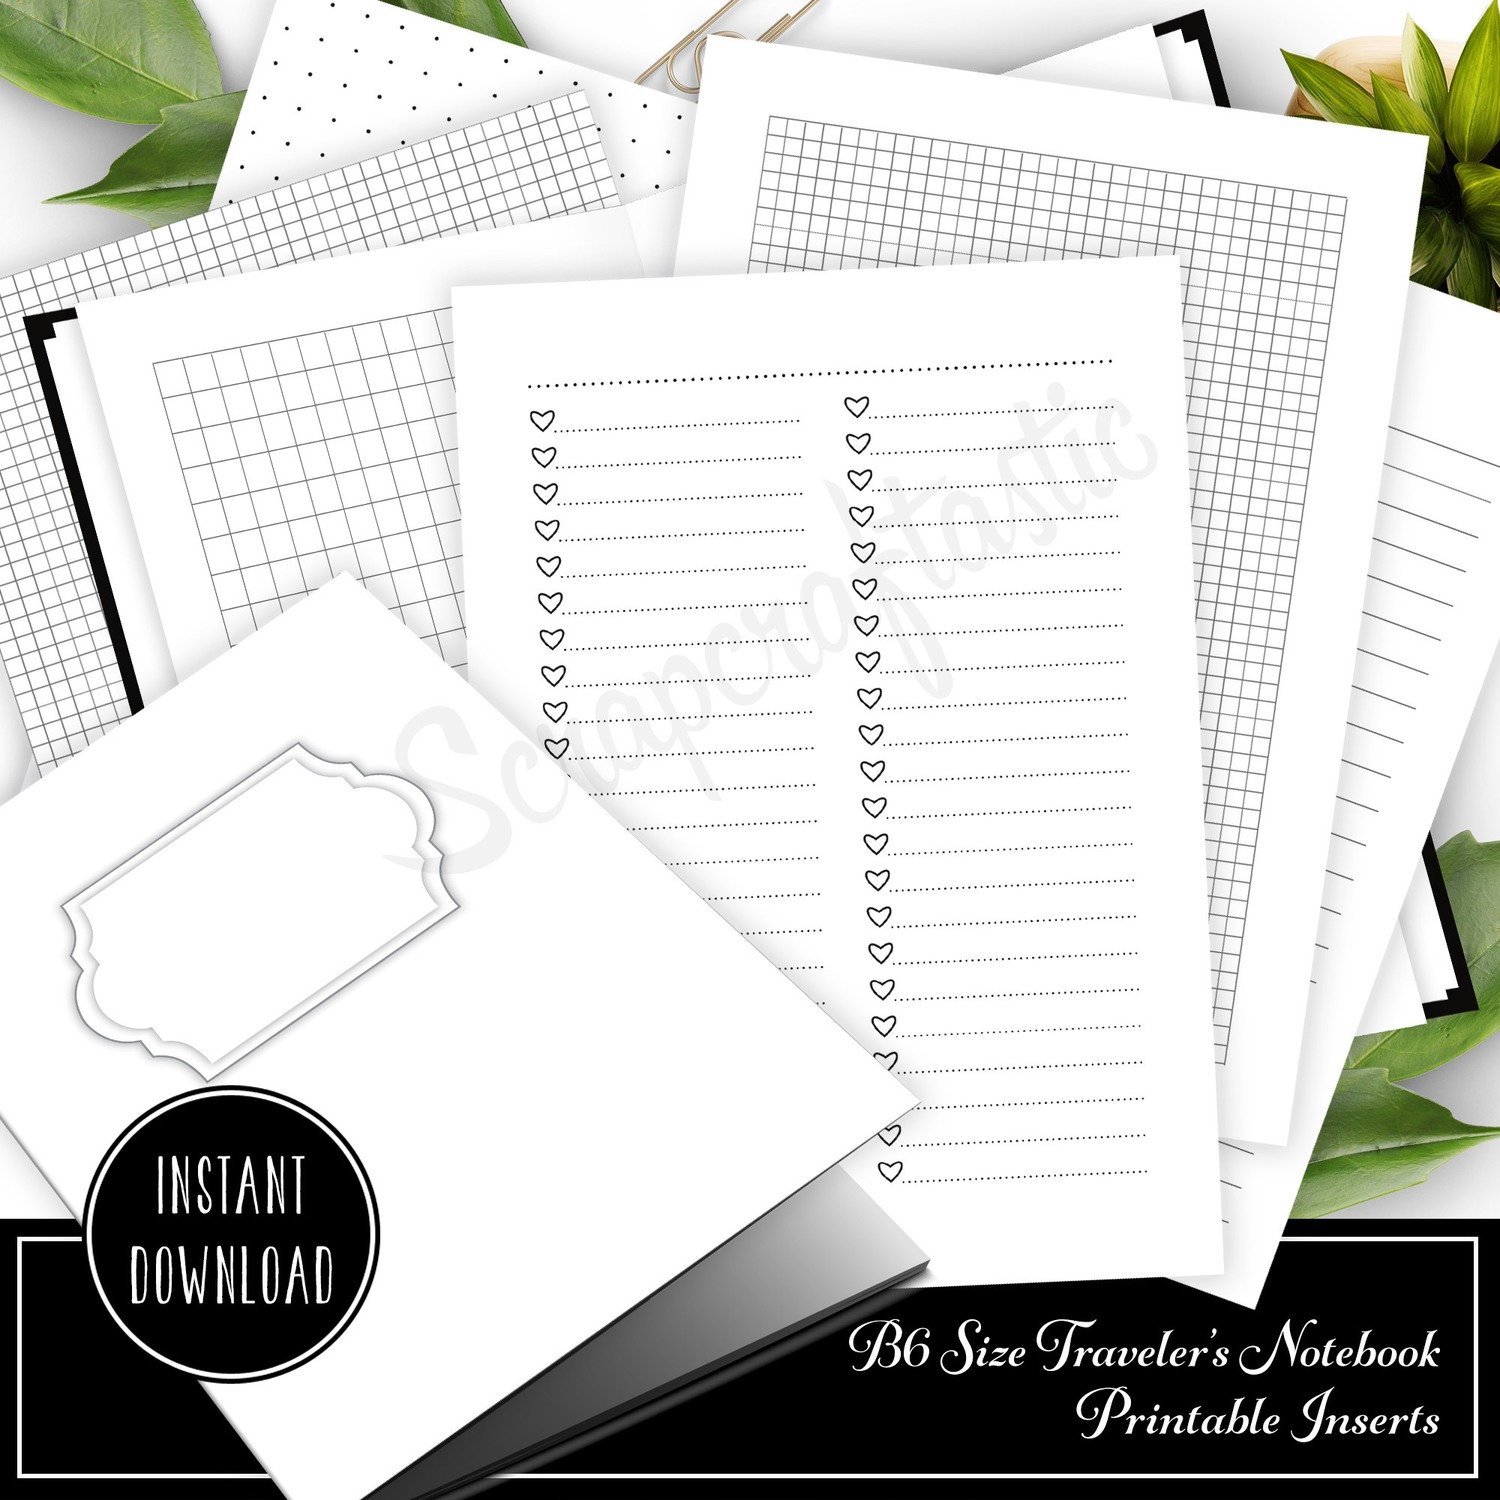 The Basics B6 Traveler's Notebook Printable Inserts - Cover, Checklists, Grids, Dot Grids, Lined and Blank Inserts